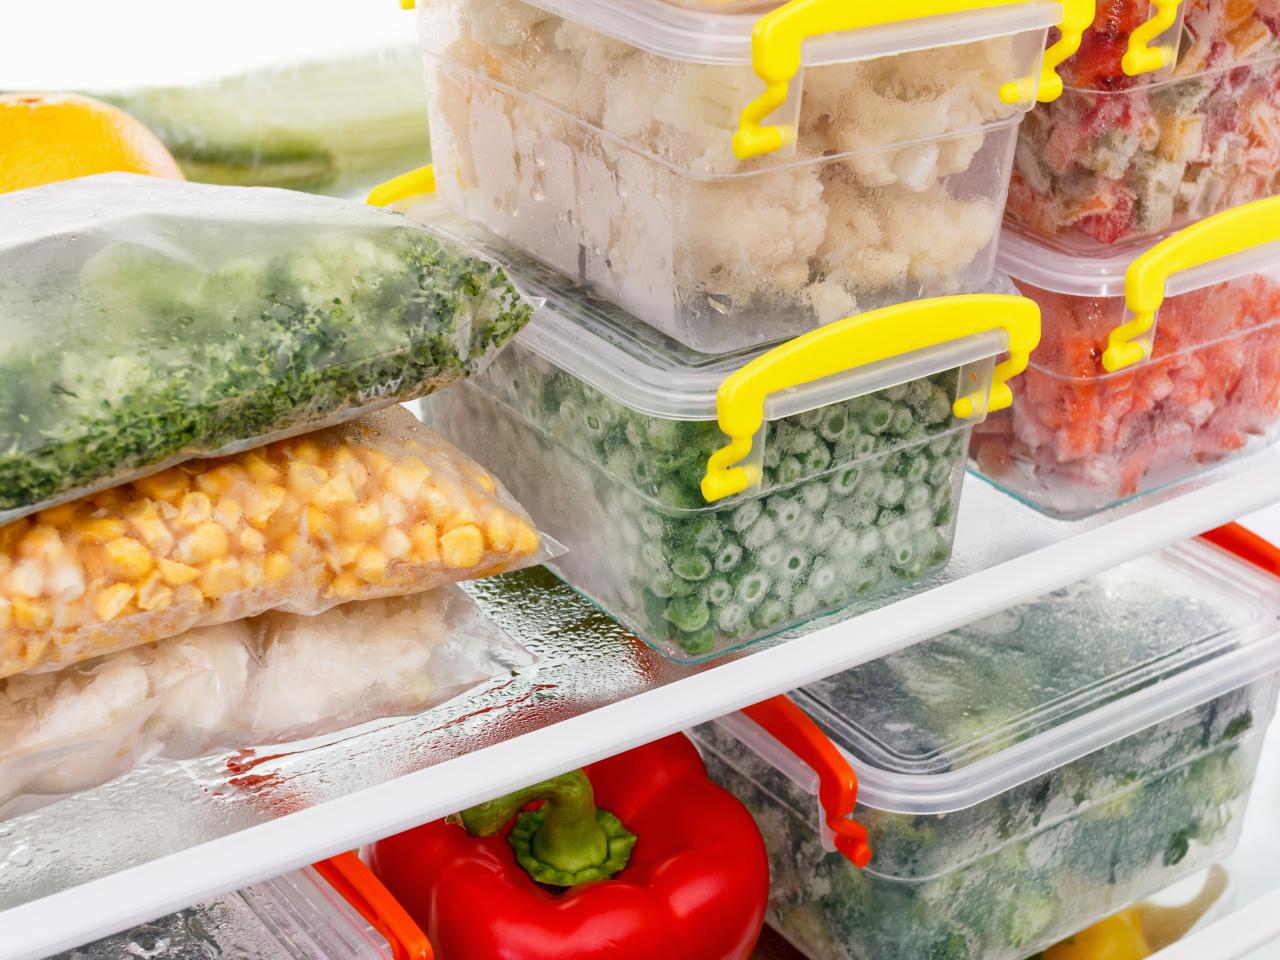 7 Freezer-Safe Containers You Can Put in the Oven, FN Dish -  Behind-the-Scenes, Food Trends, and Best Recipes : Food Network